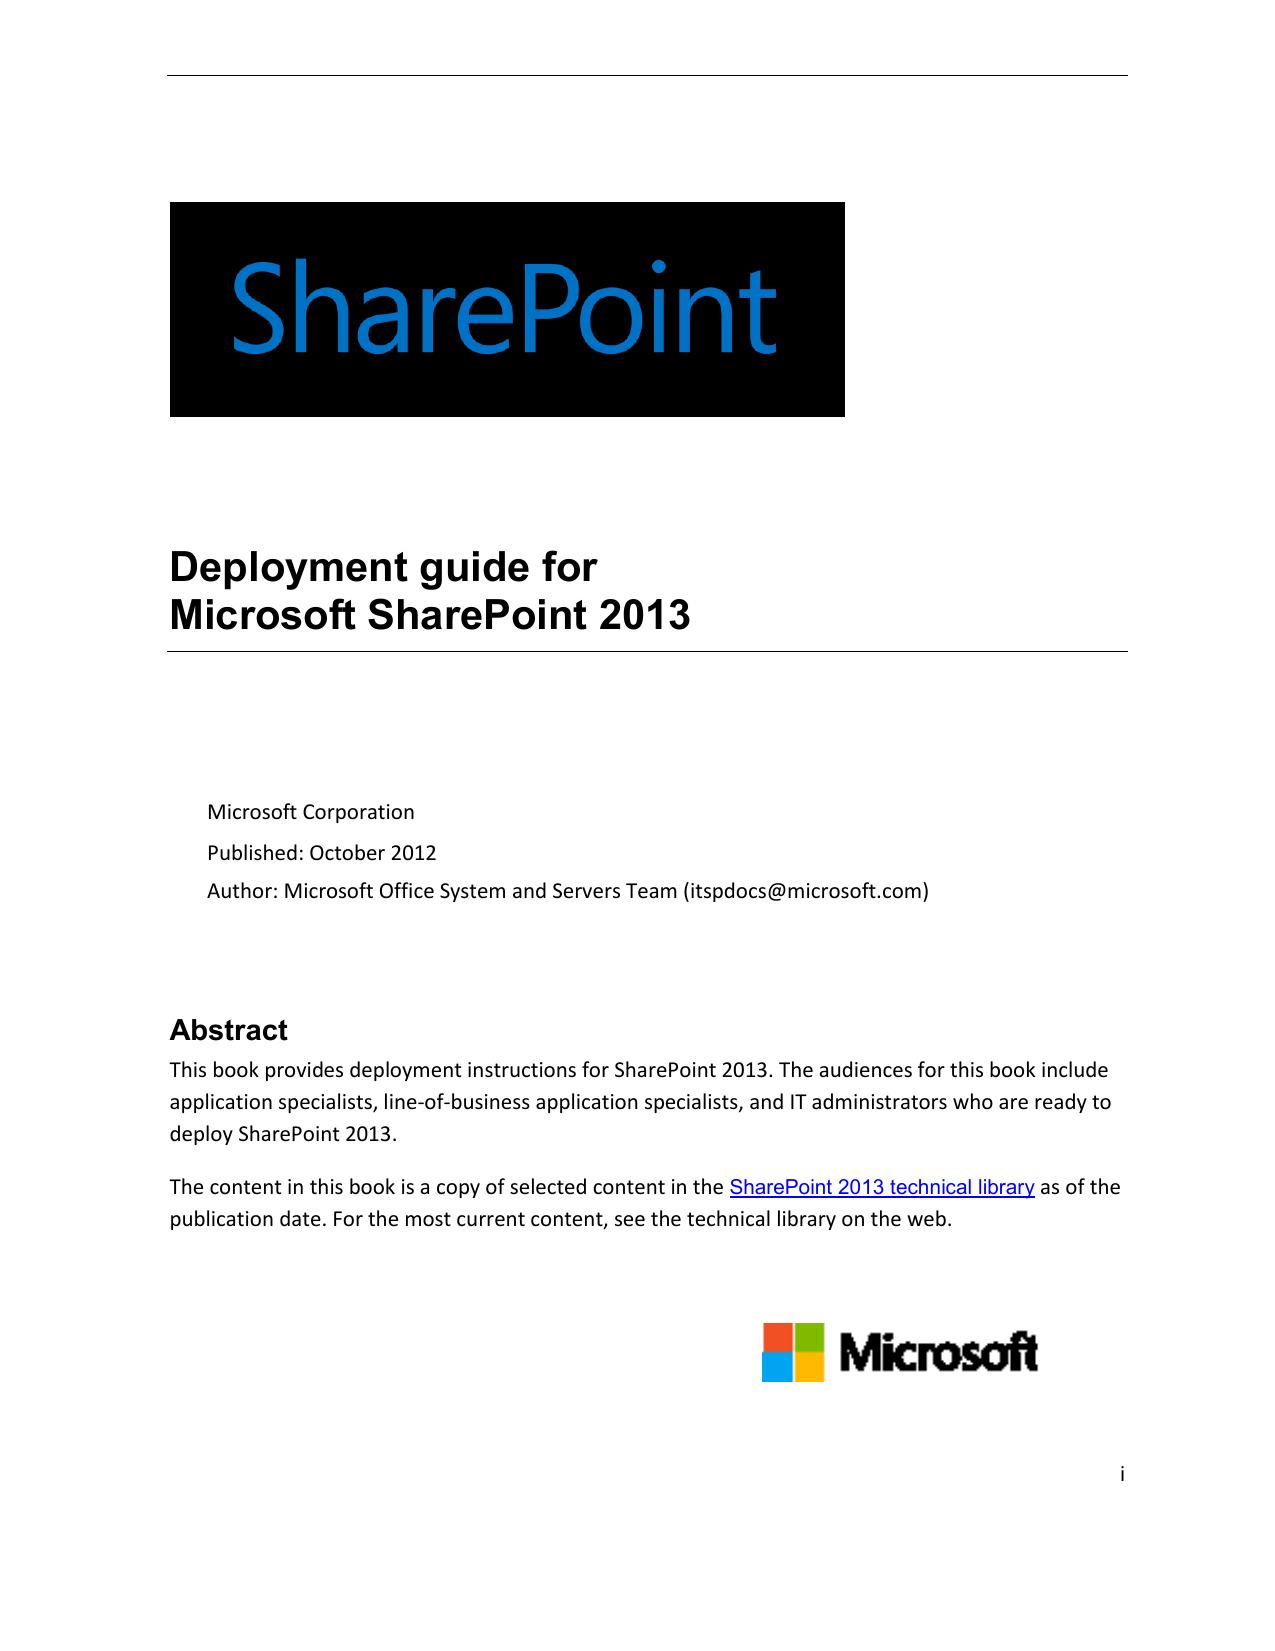 discussion board equivalent web part for mac in sharepoint 2013